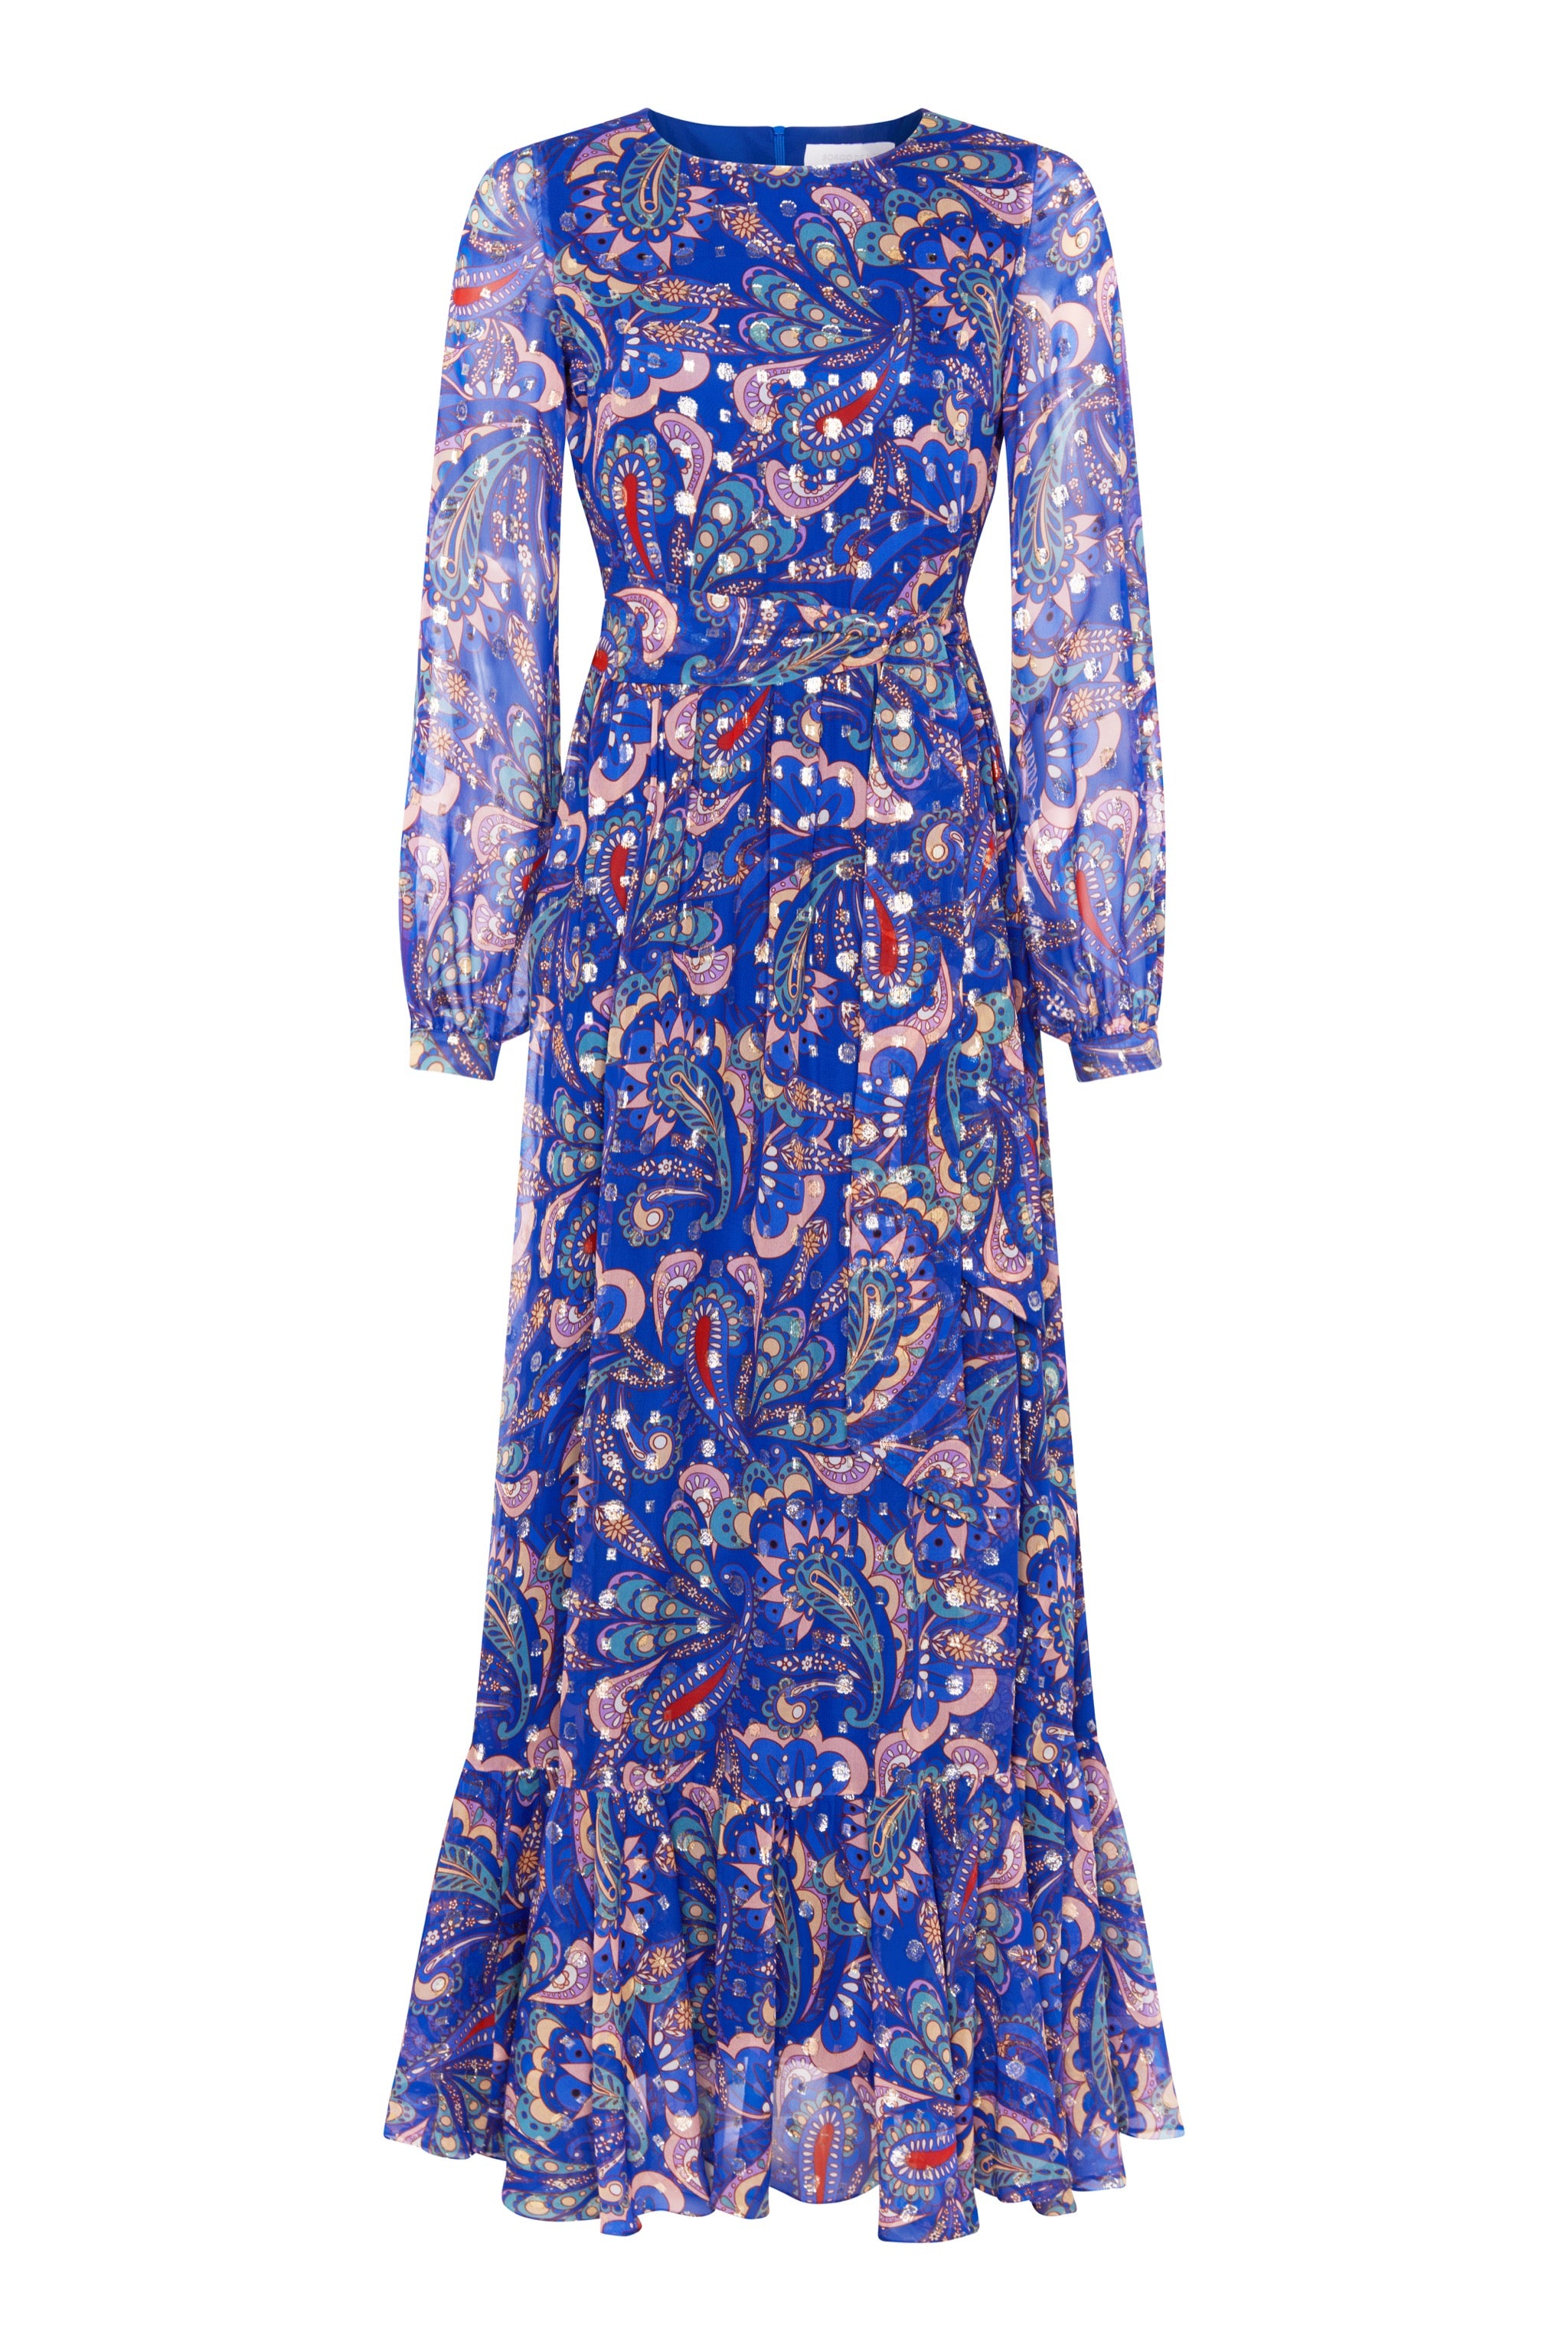 Spanish Sojourn White and Blue Paisley Tie-Strap Maxi Dress